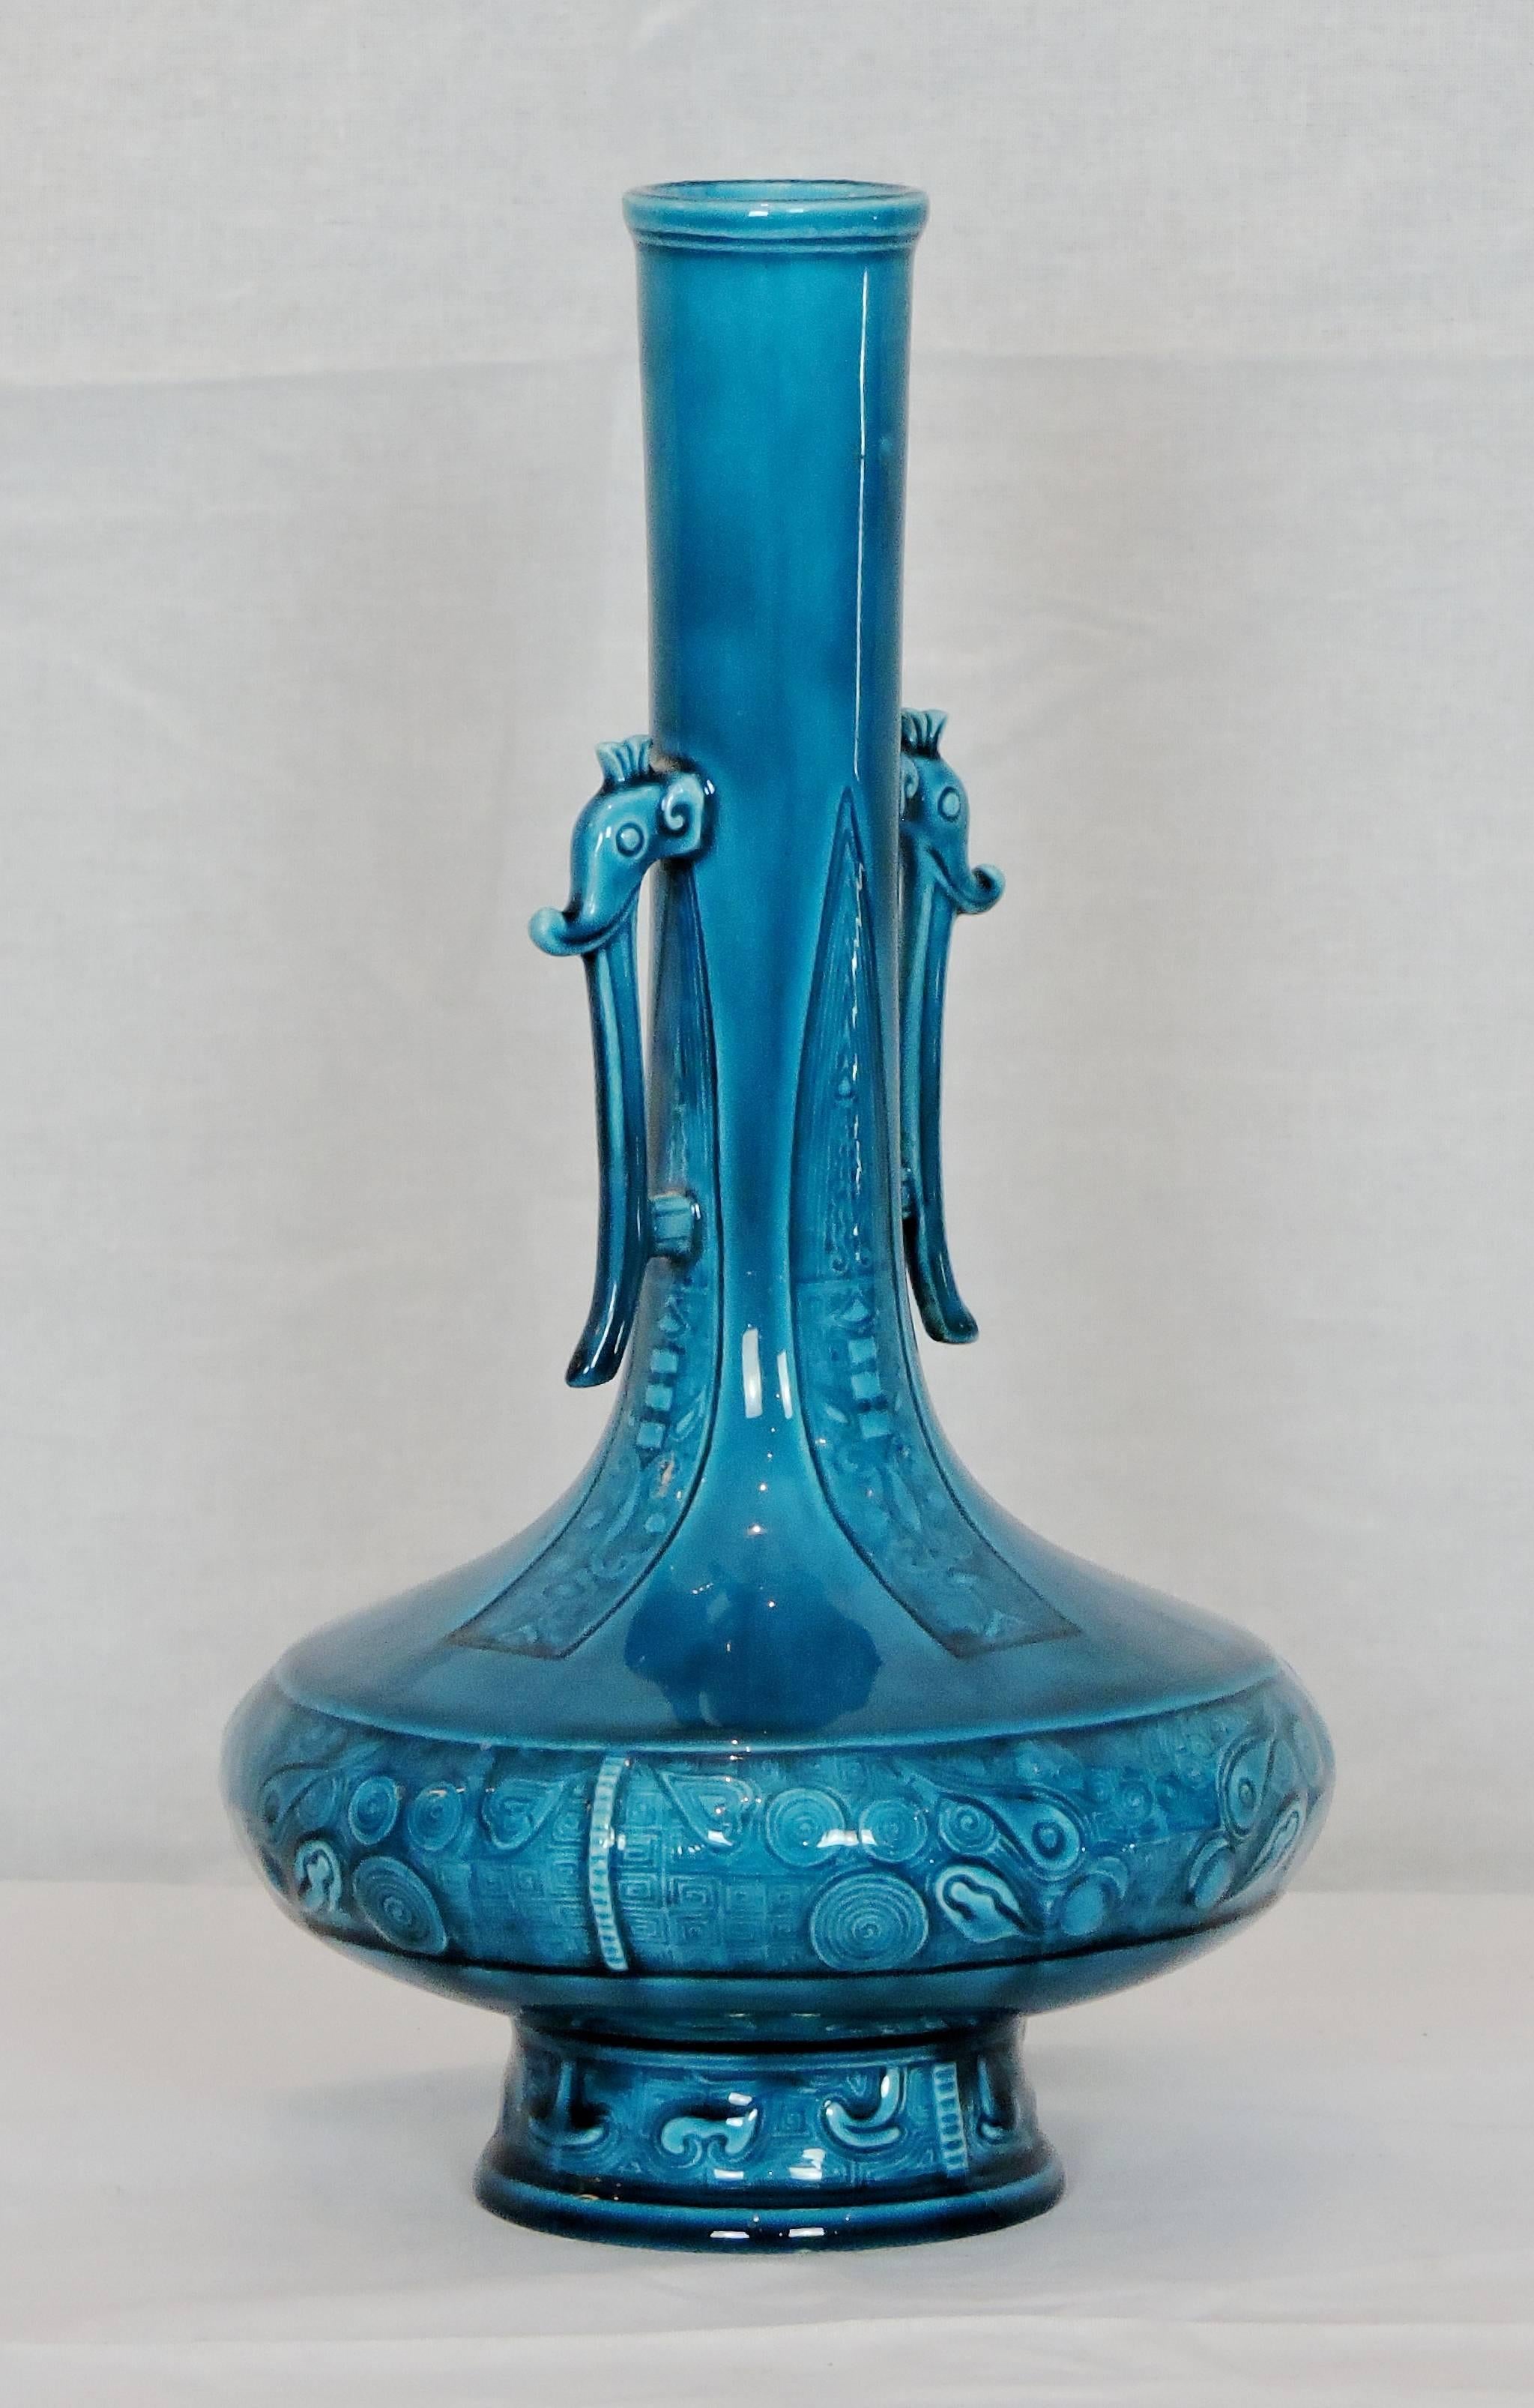 This rare soliflore vase is decorated in the oriental style: the base moulded with oriental floral motives, the neck adorned with two symmetrical elephant heads. 

A fine example of Theodore Deck's creation and 19th century European trends,